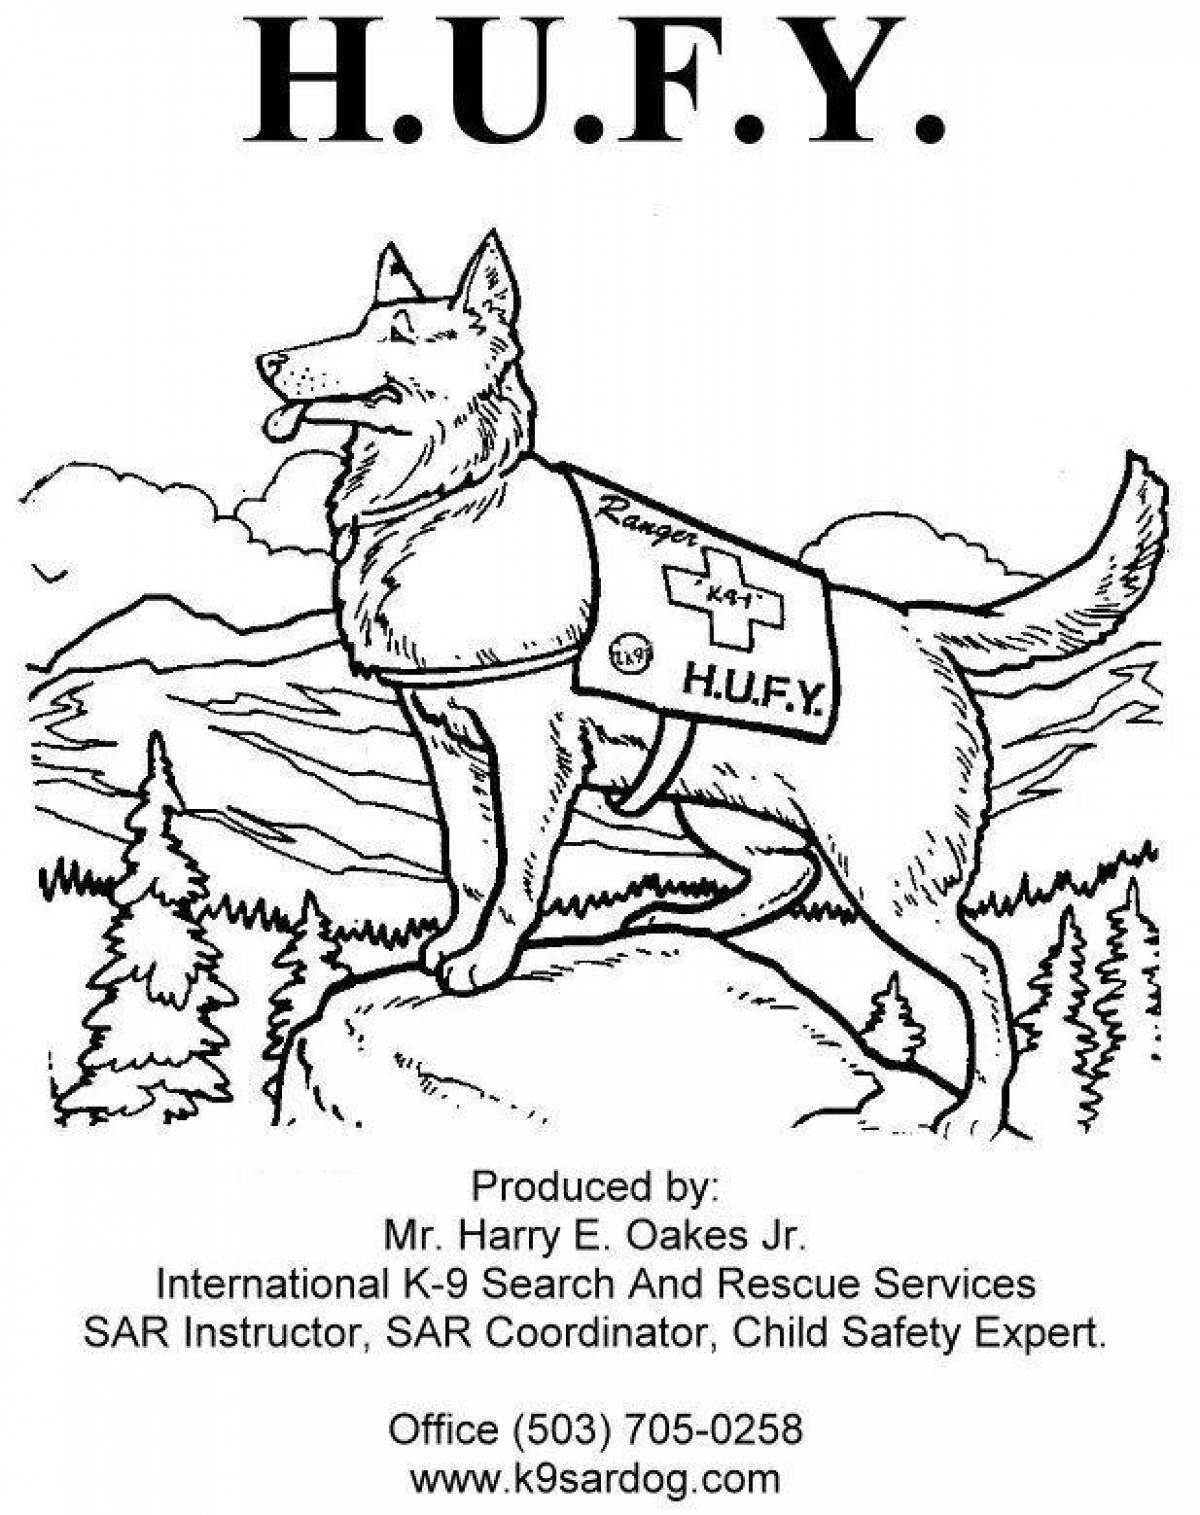 Coloring page energetic police dog